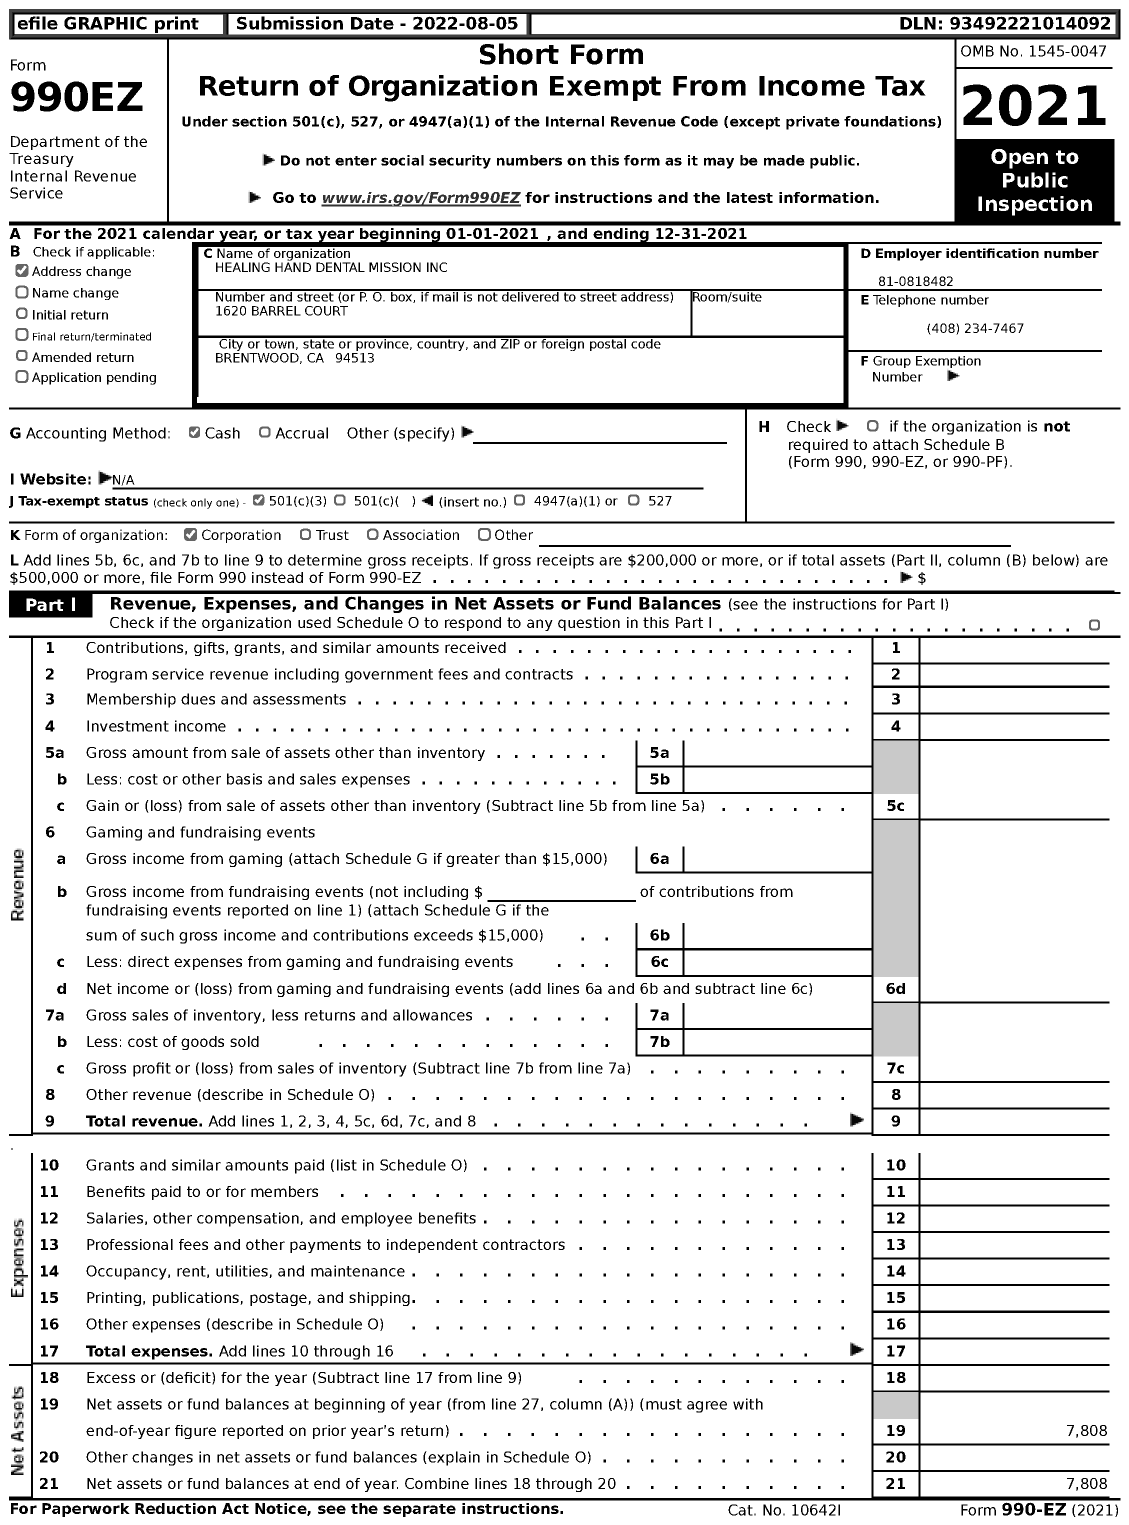 Image of first page of 2021 Form 990EZ for Healing Hand Dental Mission